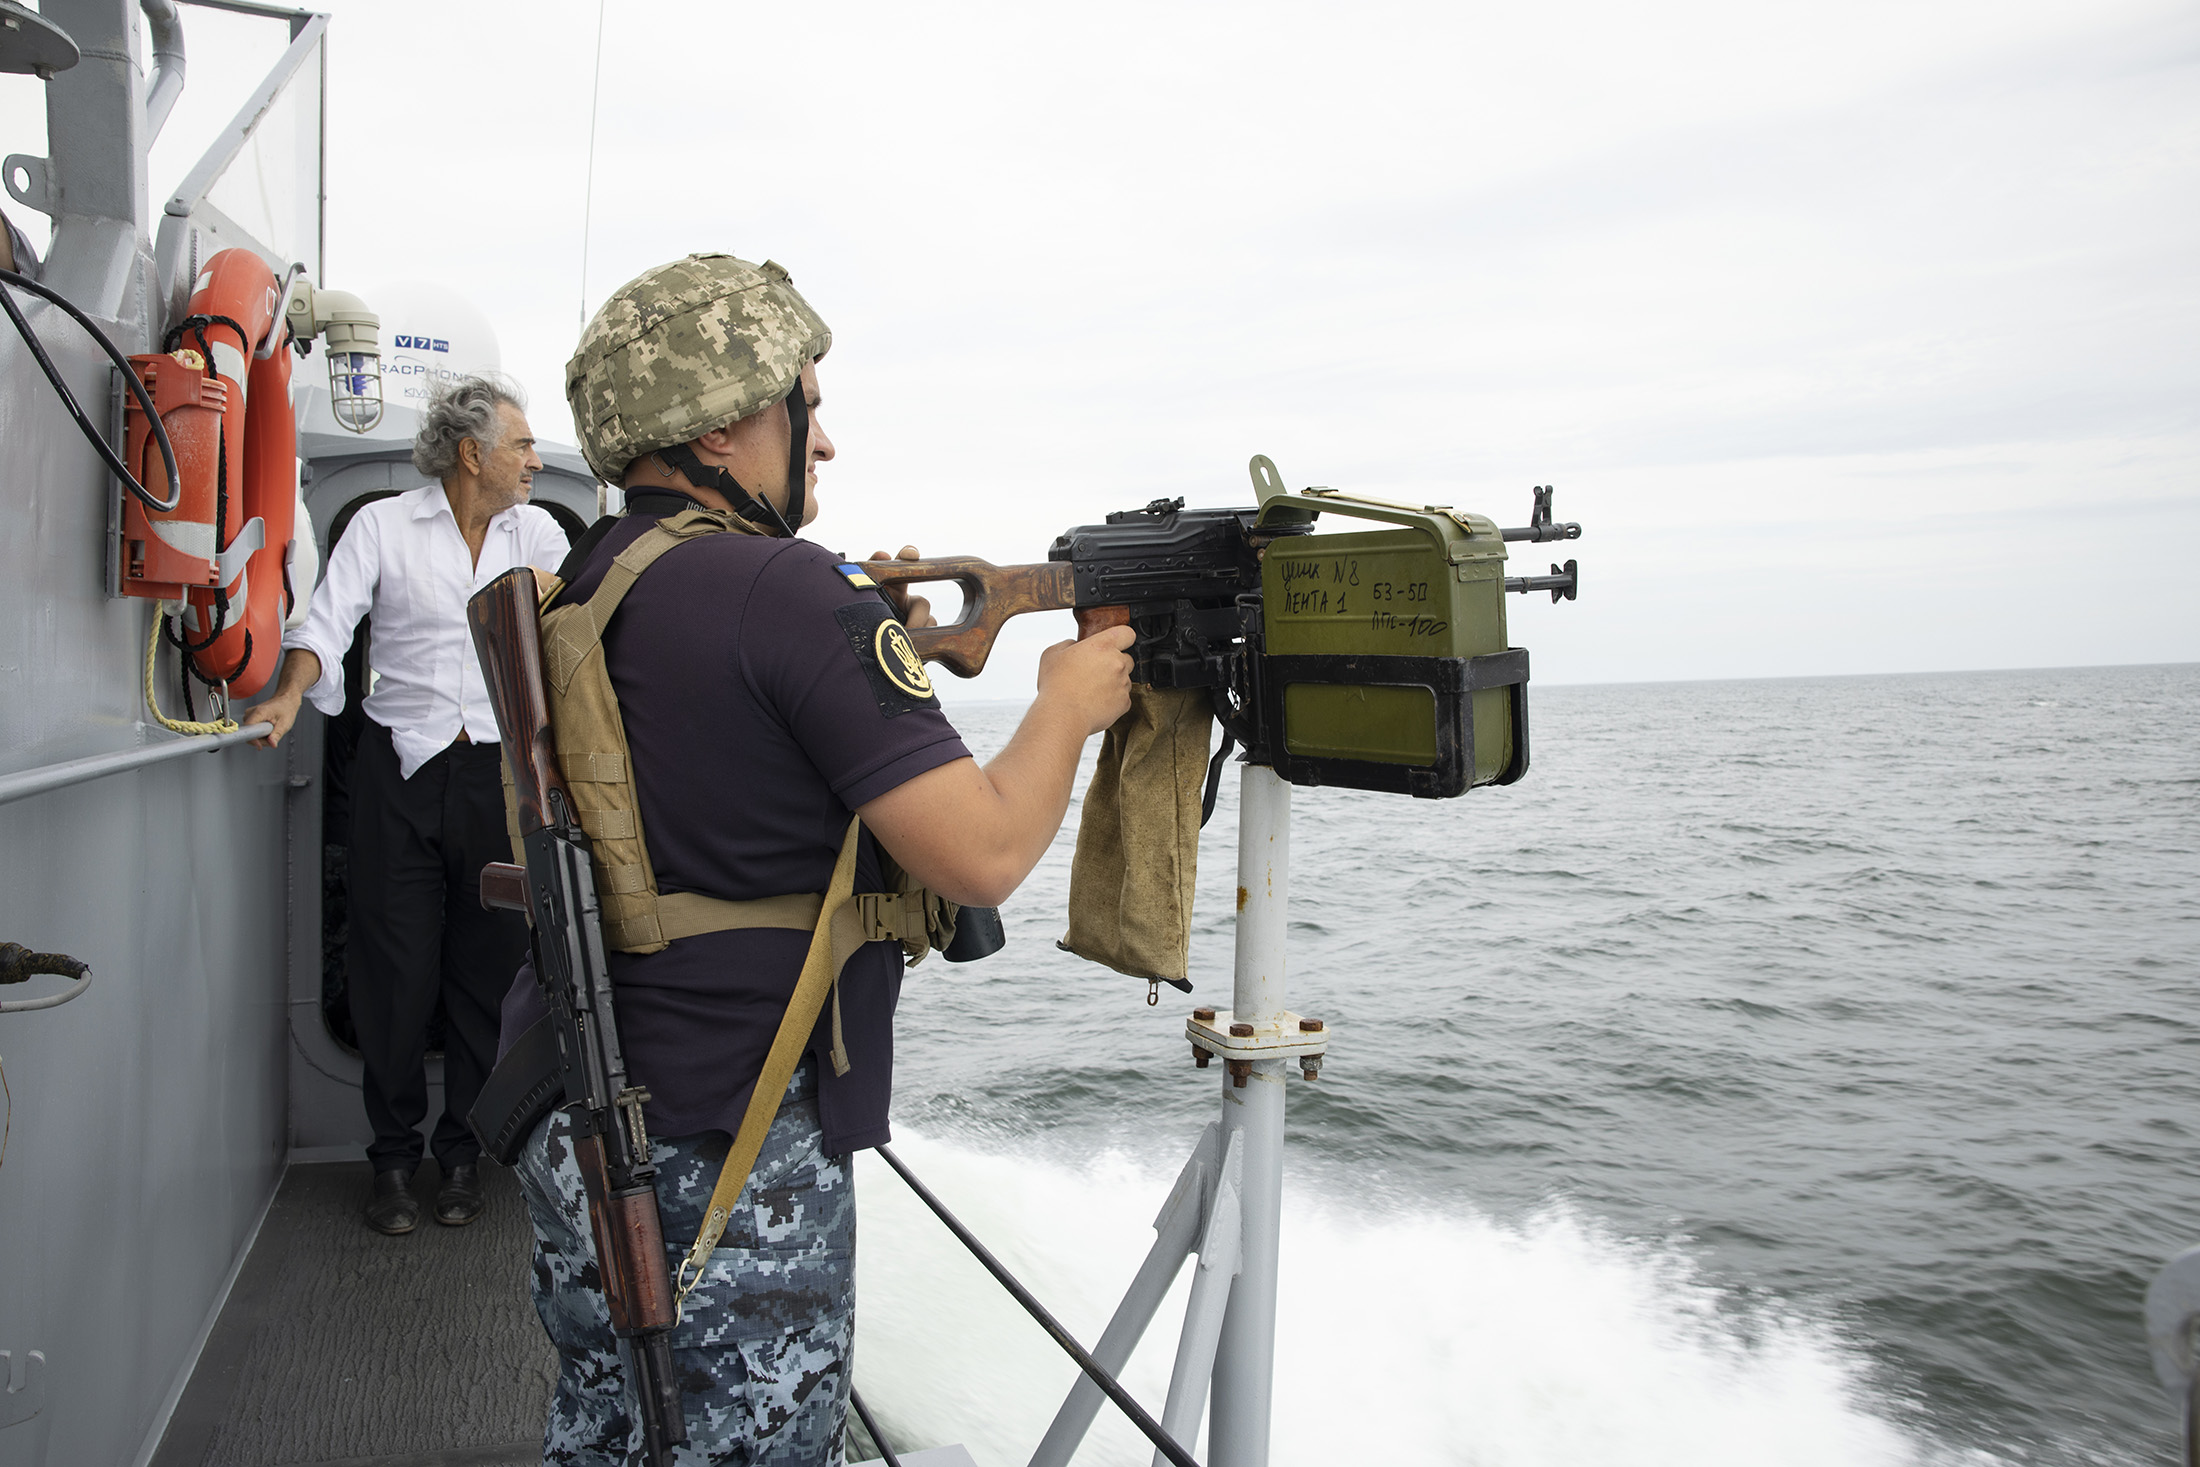 Bernard-Henri Lévy aboard the "Fastiv", one of the four patrol boats of the Ukrainian navy in charge of monitoring the presence of enemy ships off Odessa.